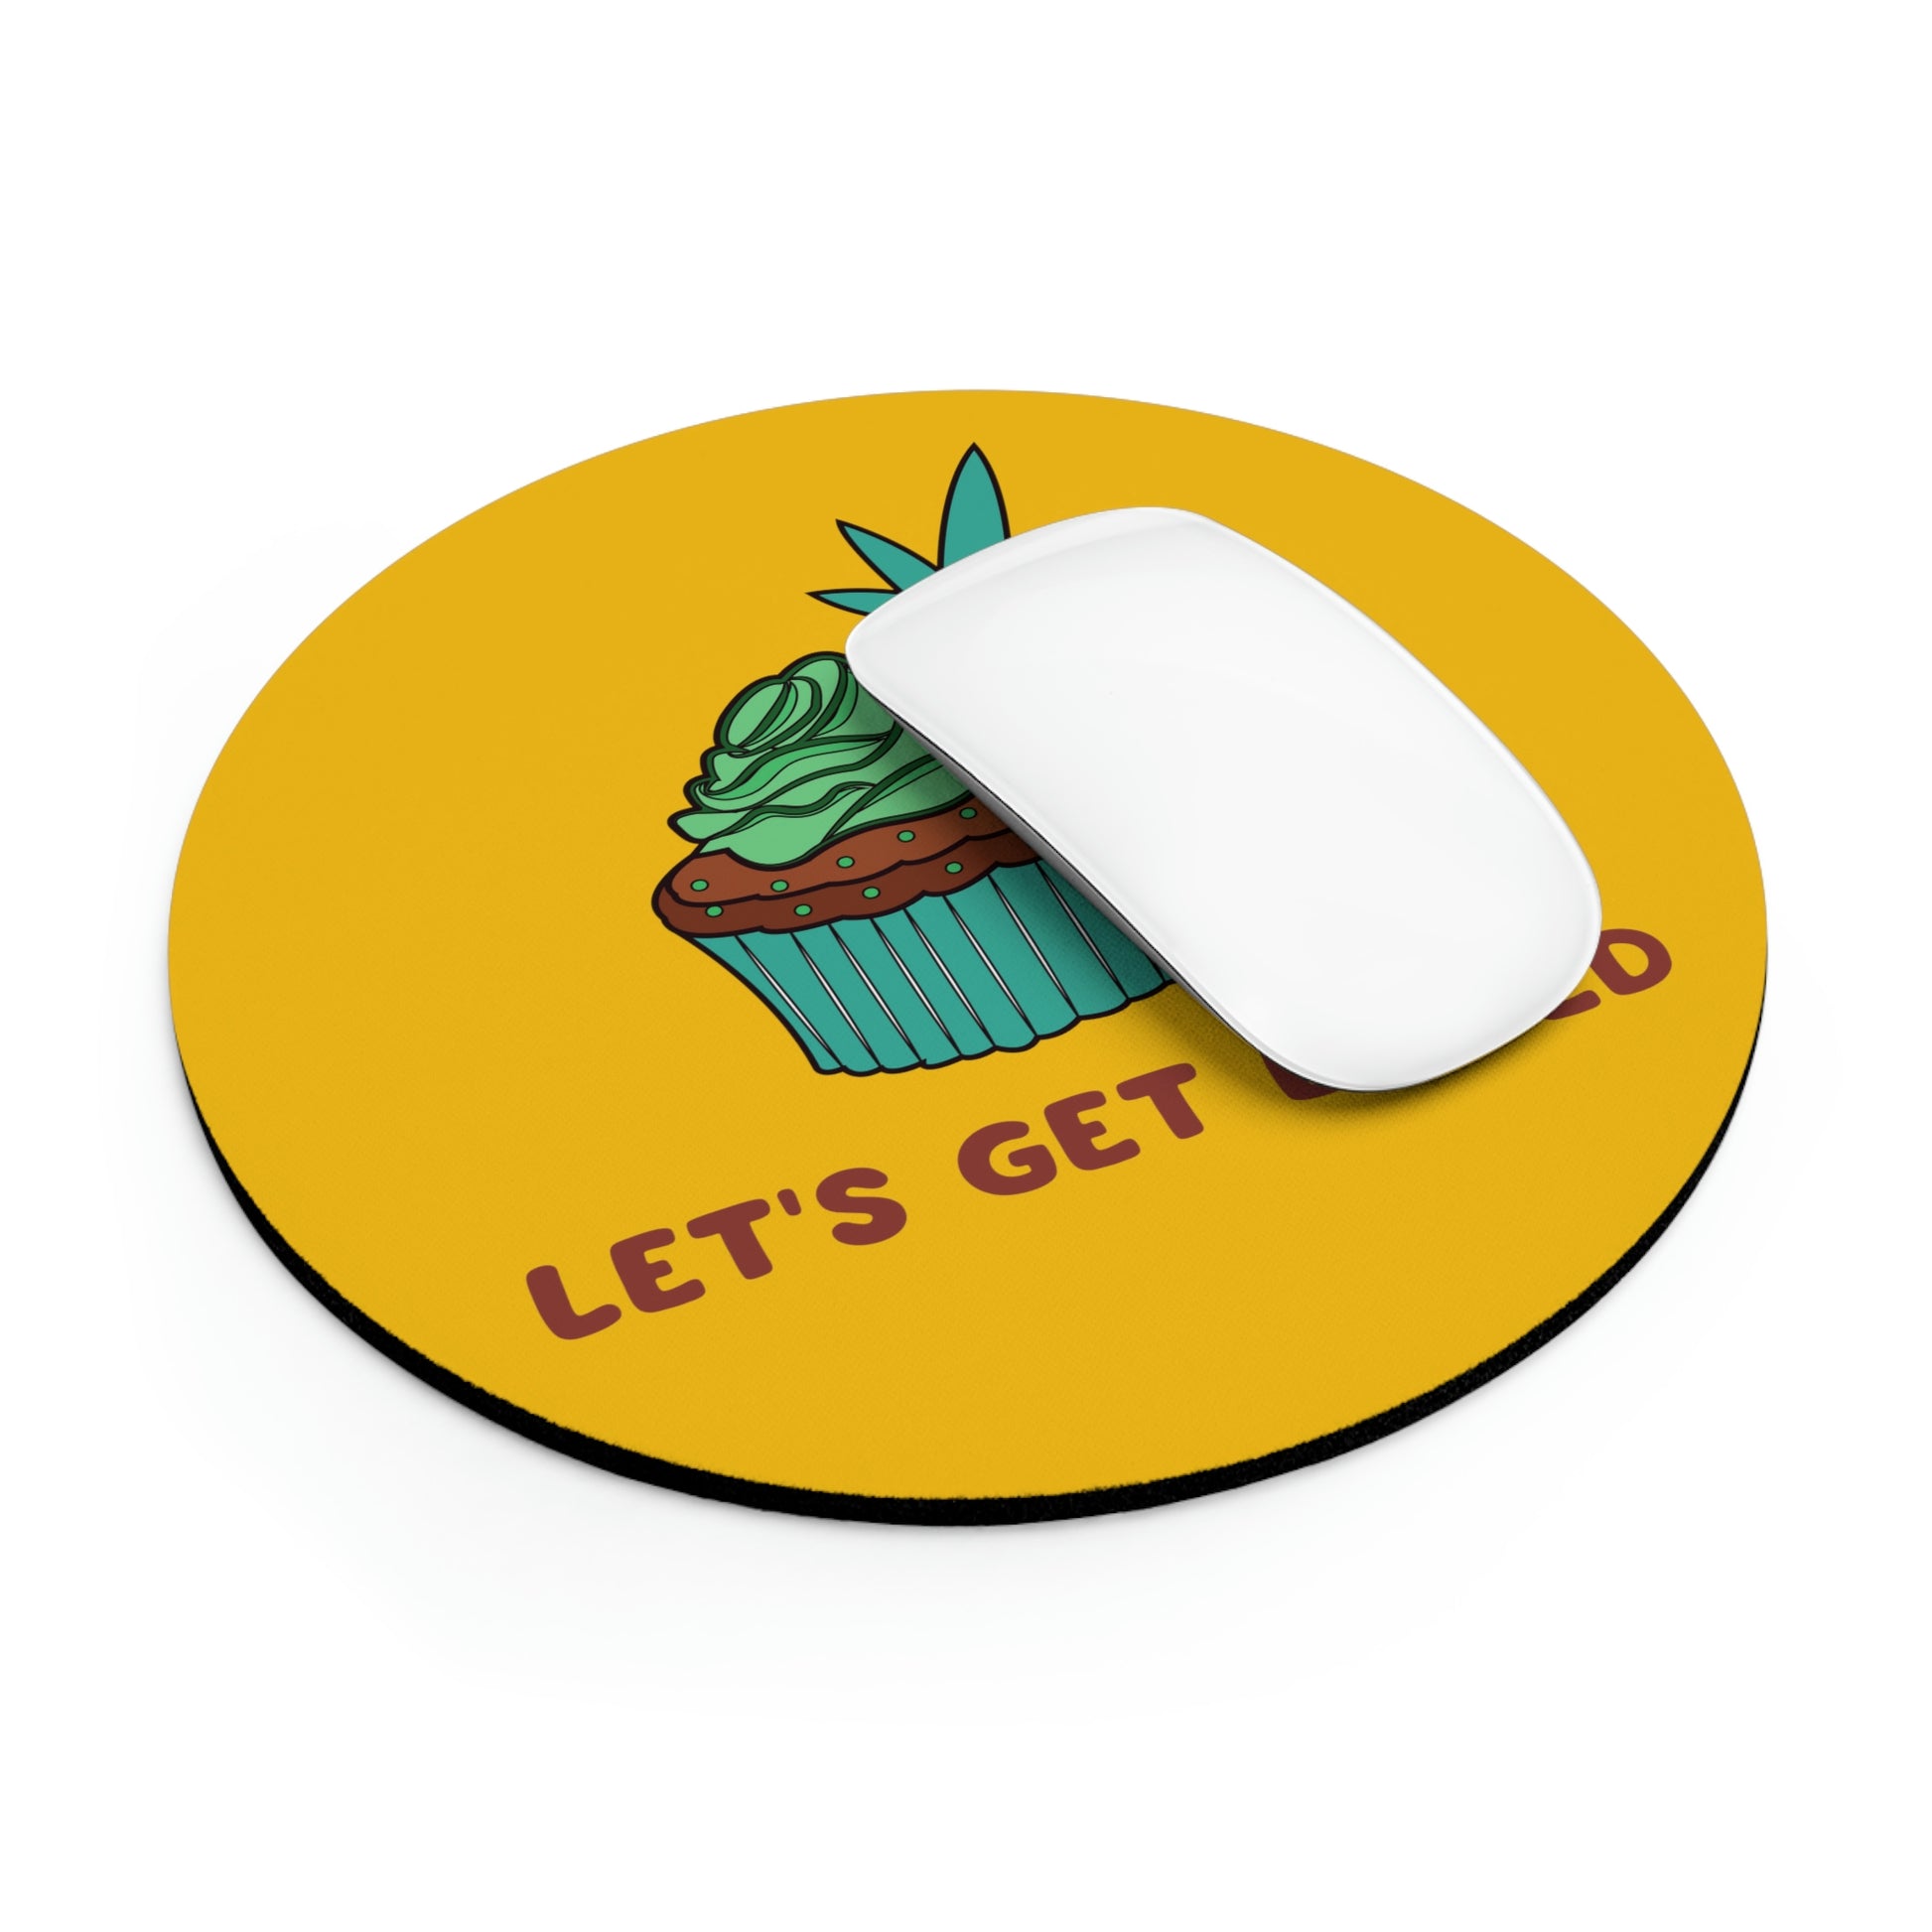 This round yellow Let's Get Baked Mouse Pad is in use with a white mouse covering part of the graphic to show the purchaser how it will look for personal use.